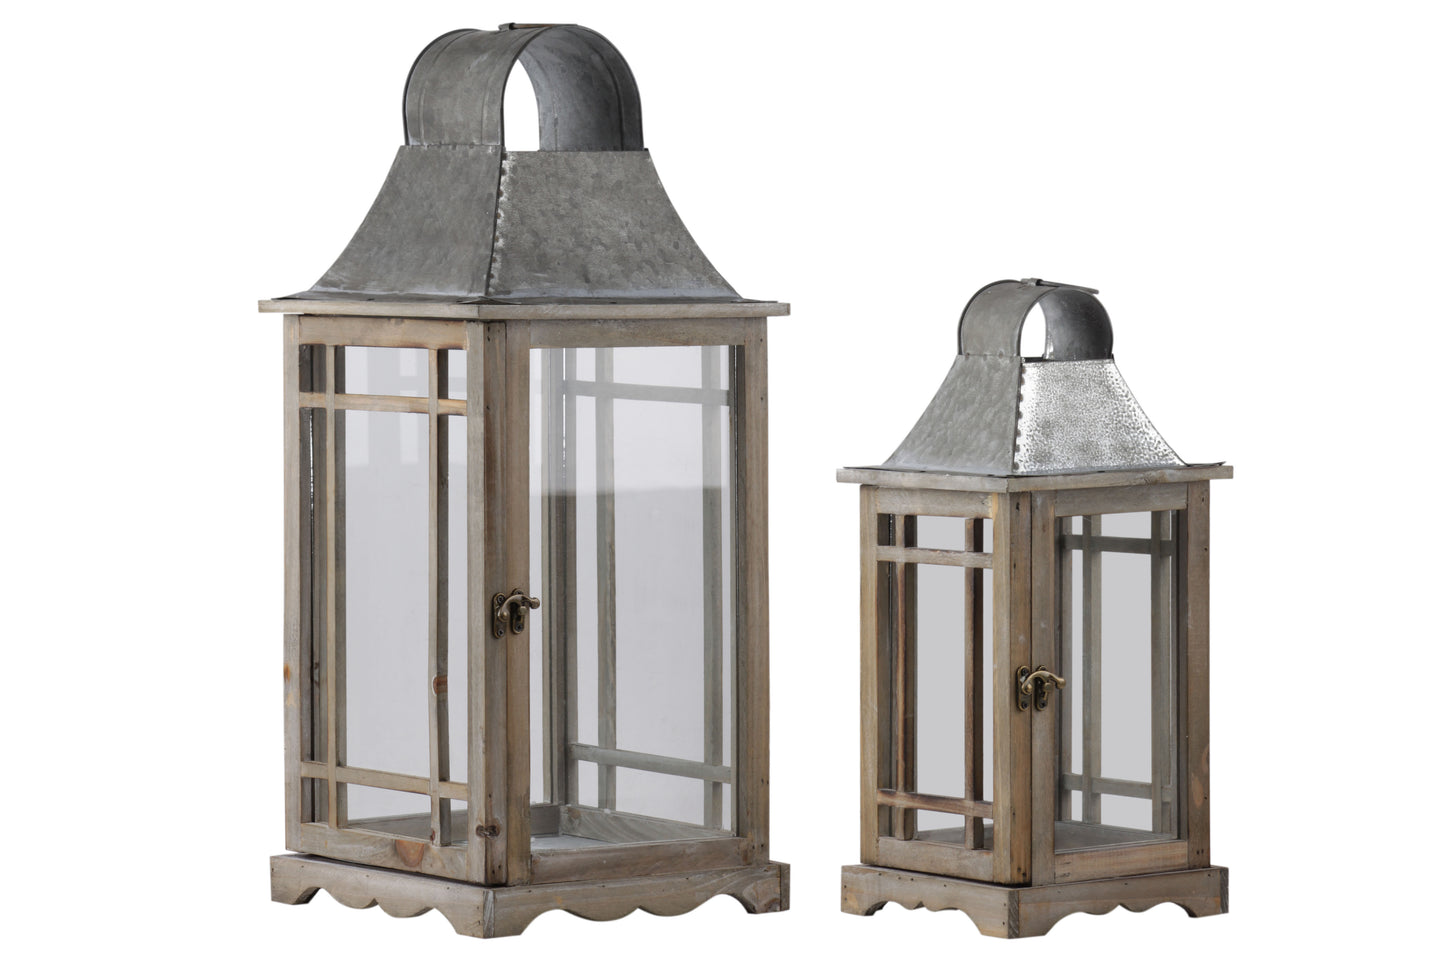 Wood Square Lantern with Metal Top, Ring Handle and Side Intersecting Lines Design